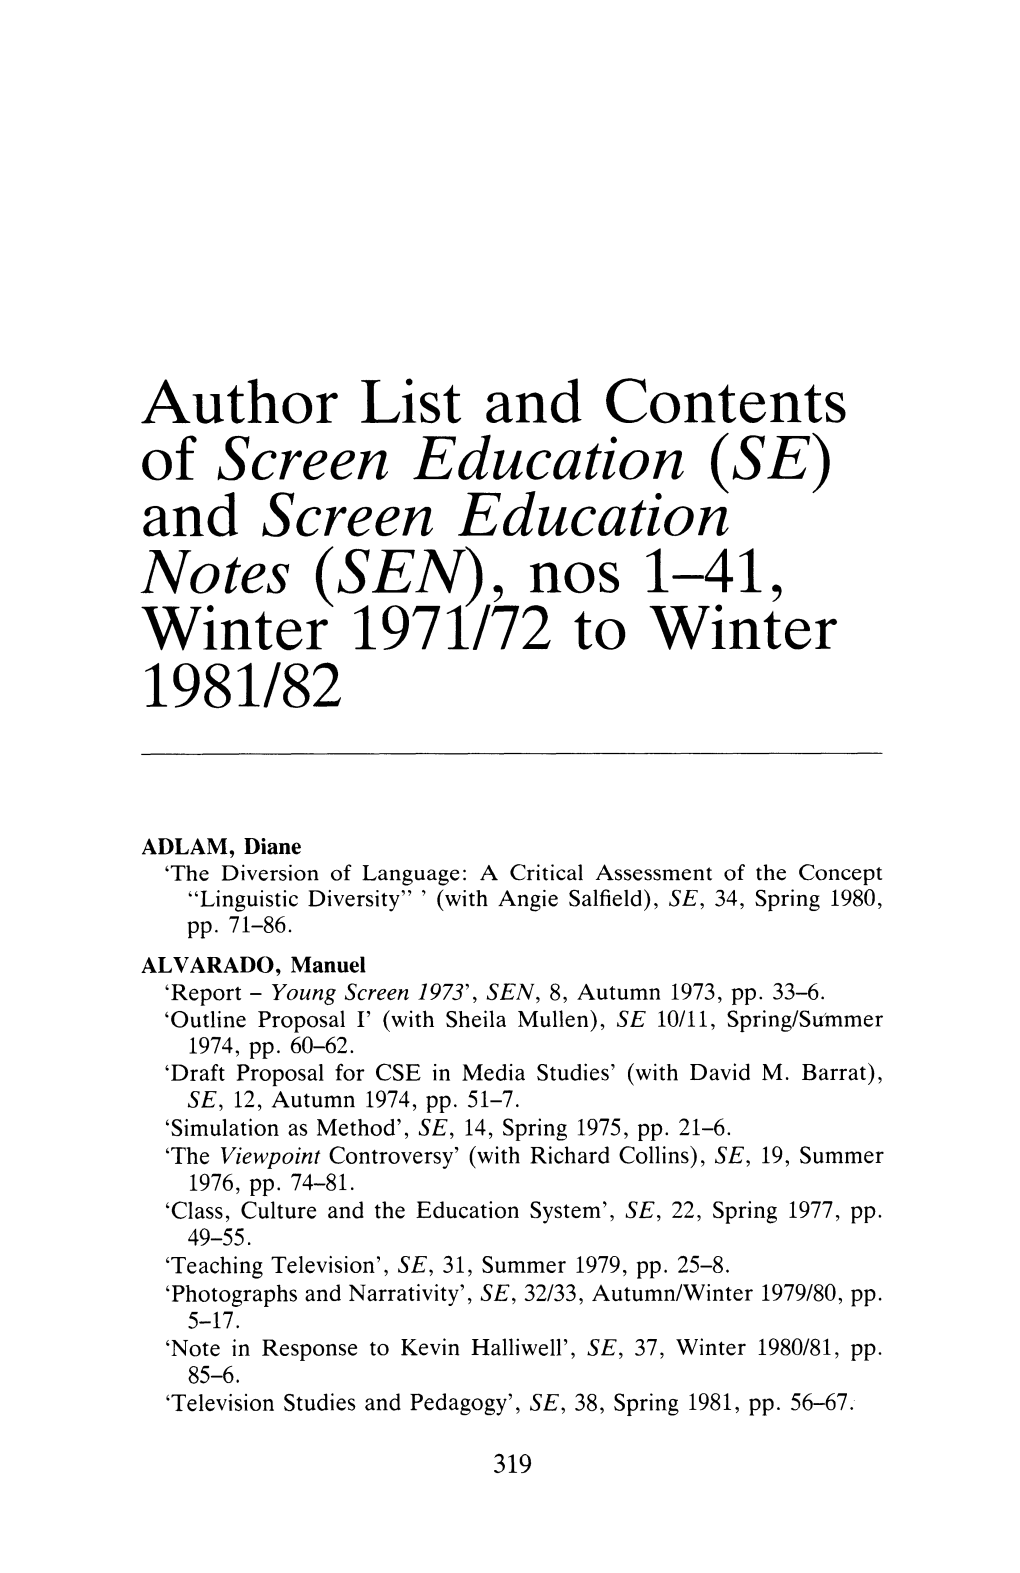 Of Screen Education (SE) and Screen Education Notes (SEN), Nos 1-41, Winter 1971/72 to Winter 1981/82